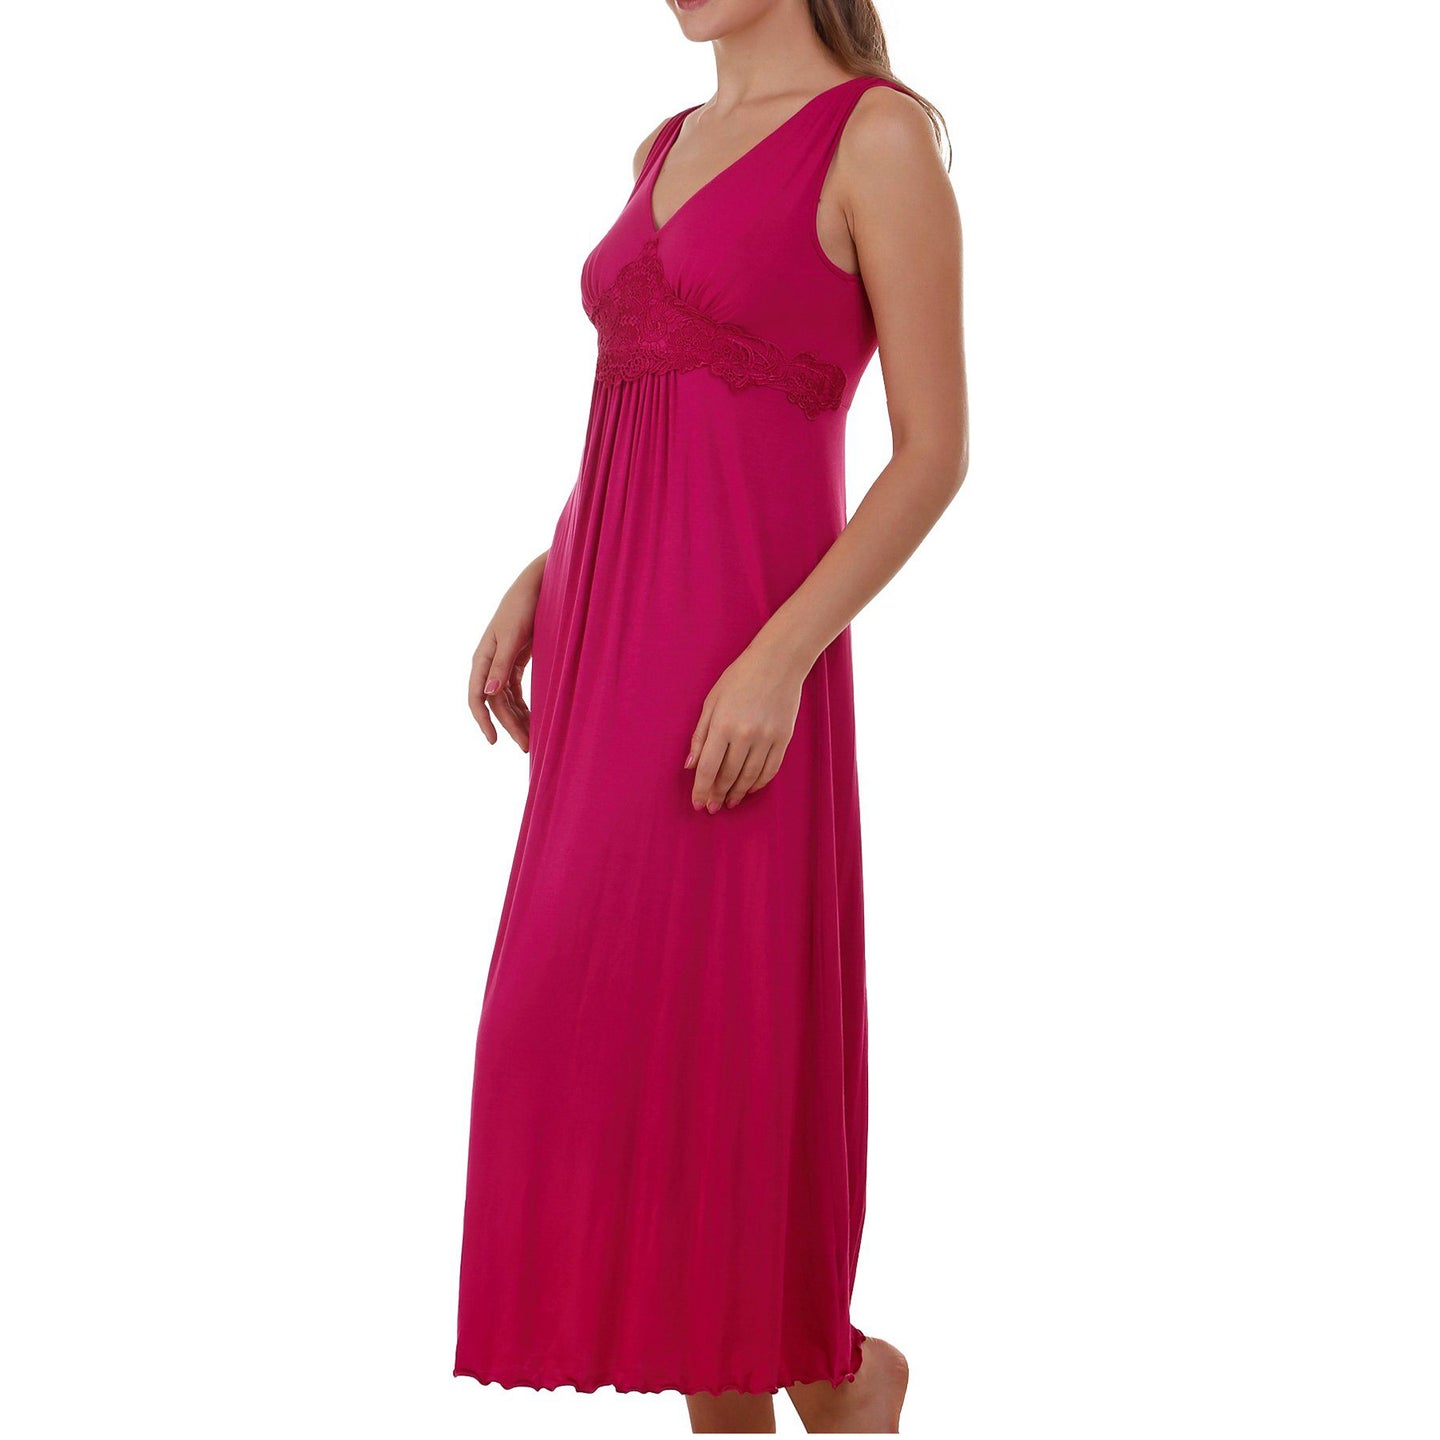 Dreamy Nightgown - Berry Mystique Intimates